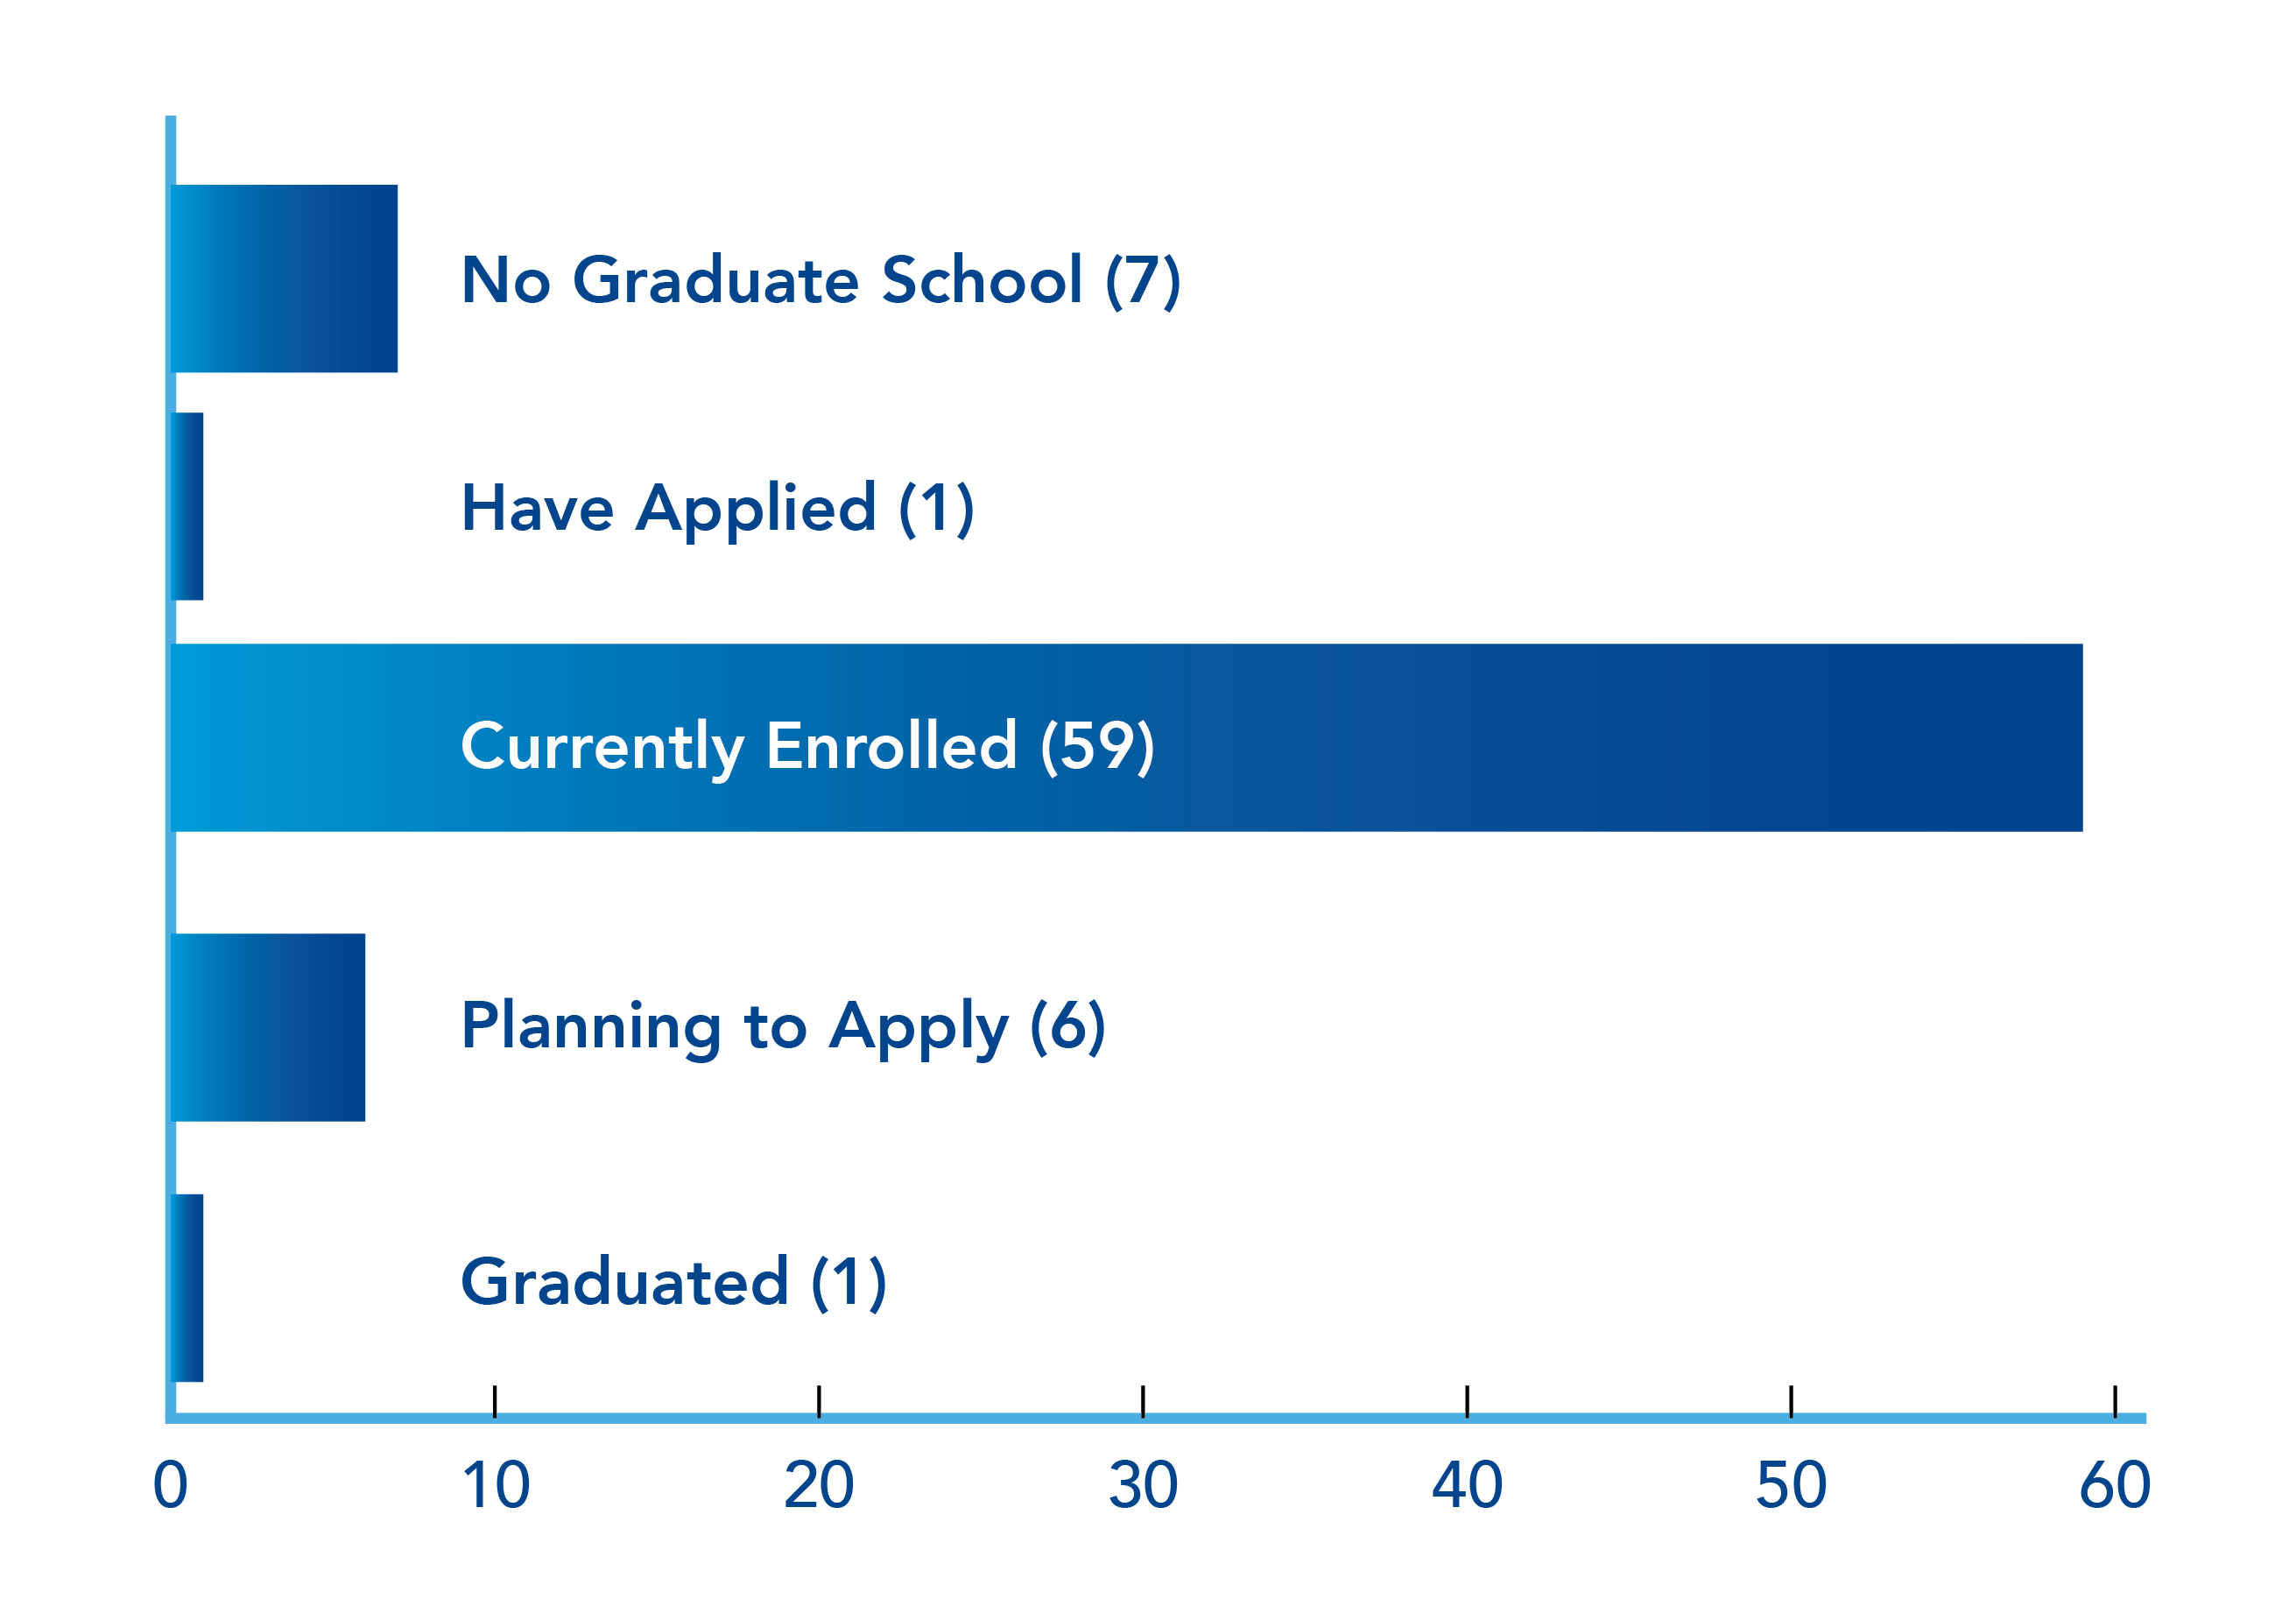 Bar graph. No graduate school (7), have applied (1), currently enrolled (59), planning to apply (6), graduated (1).